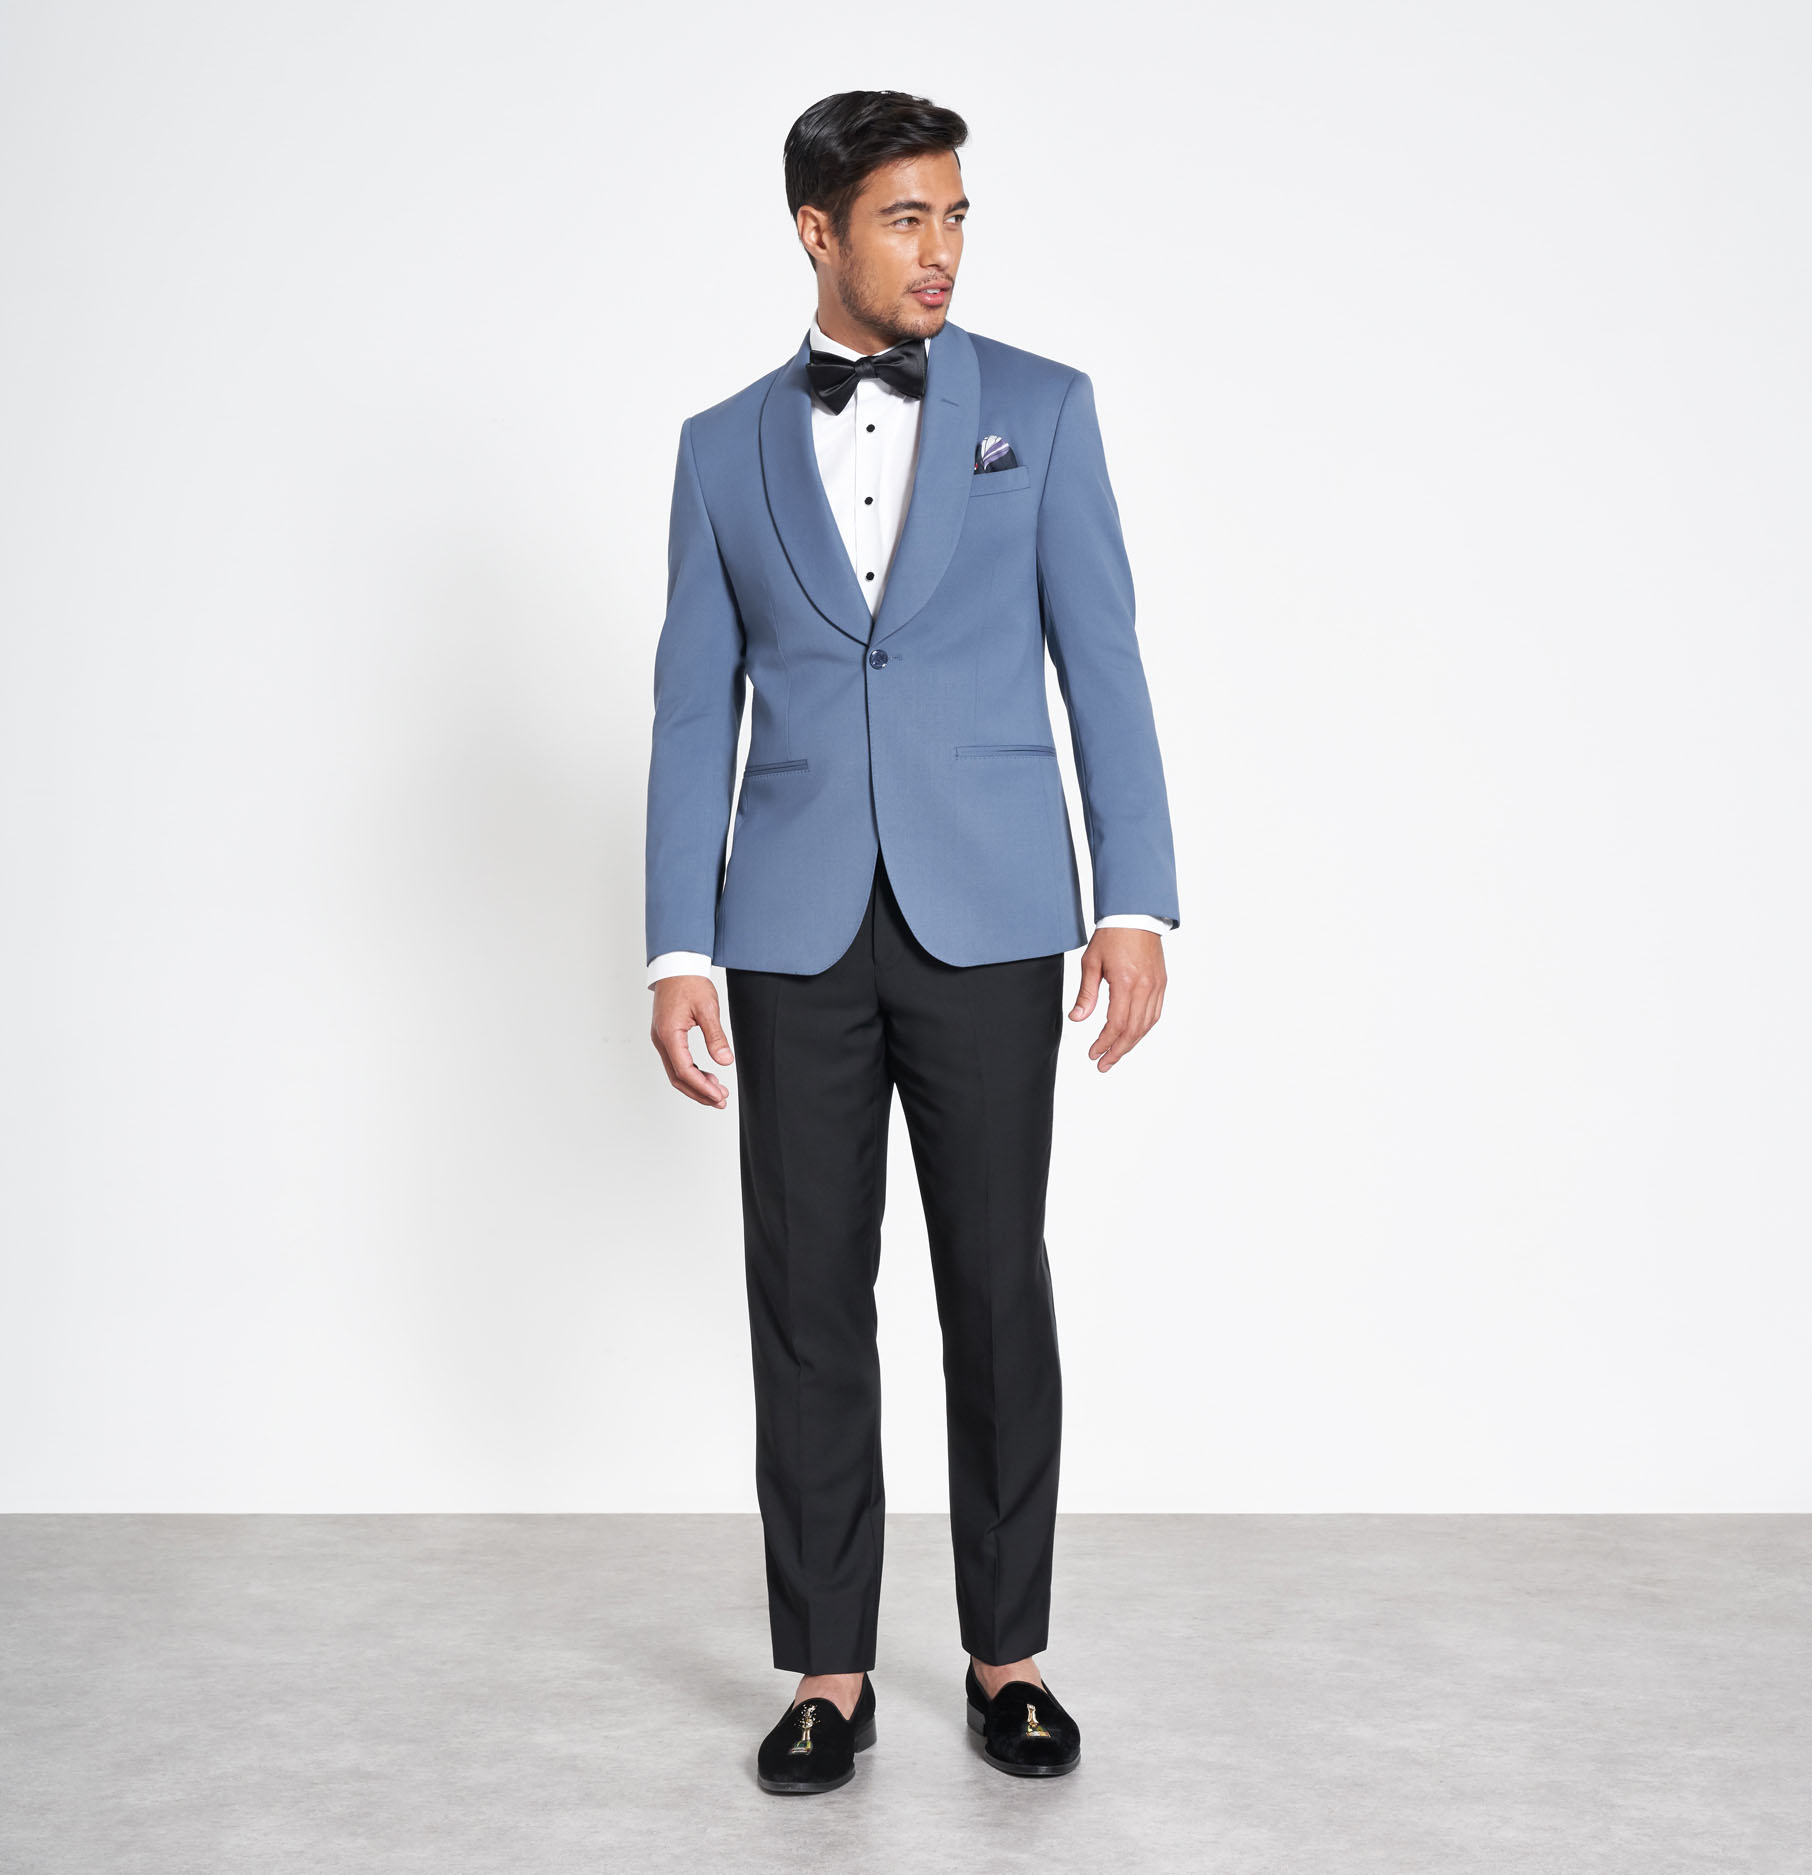 Which trouser colour will be best for a navy blue blazer? - Quora